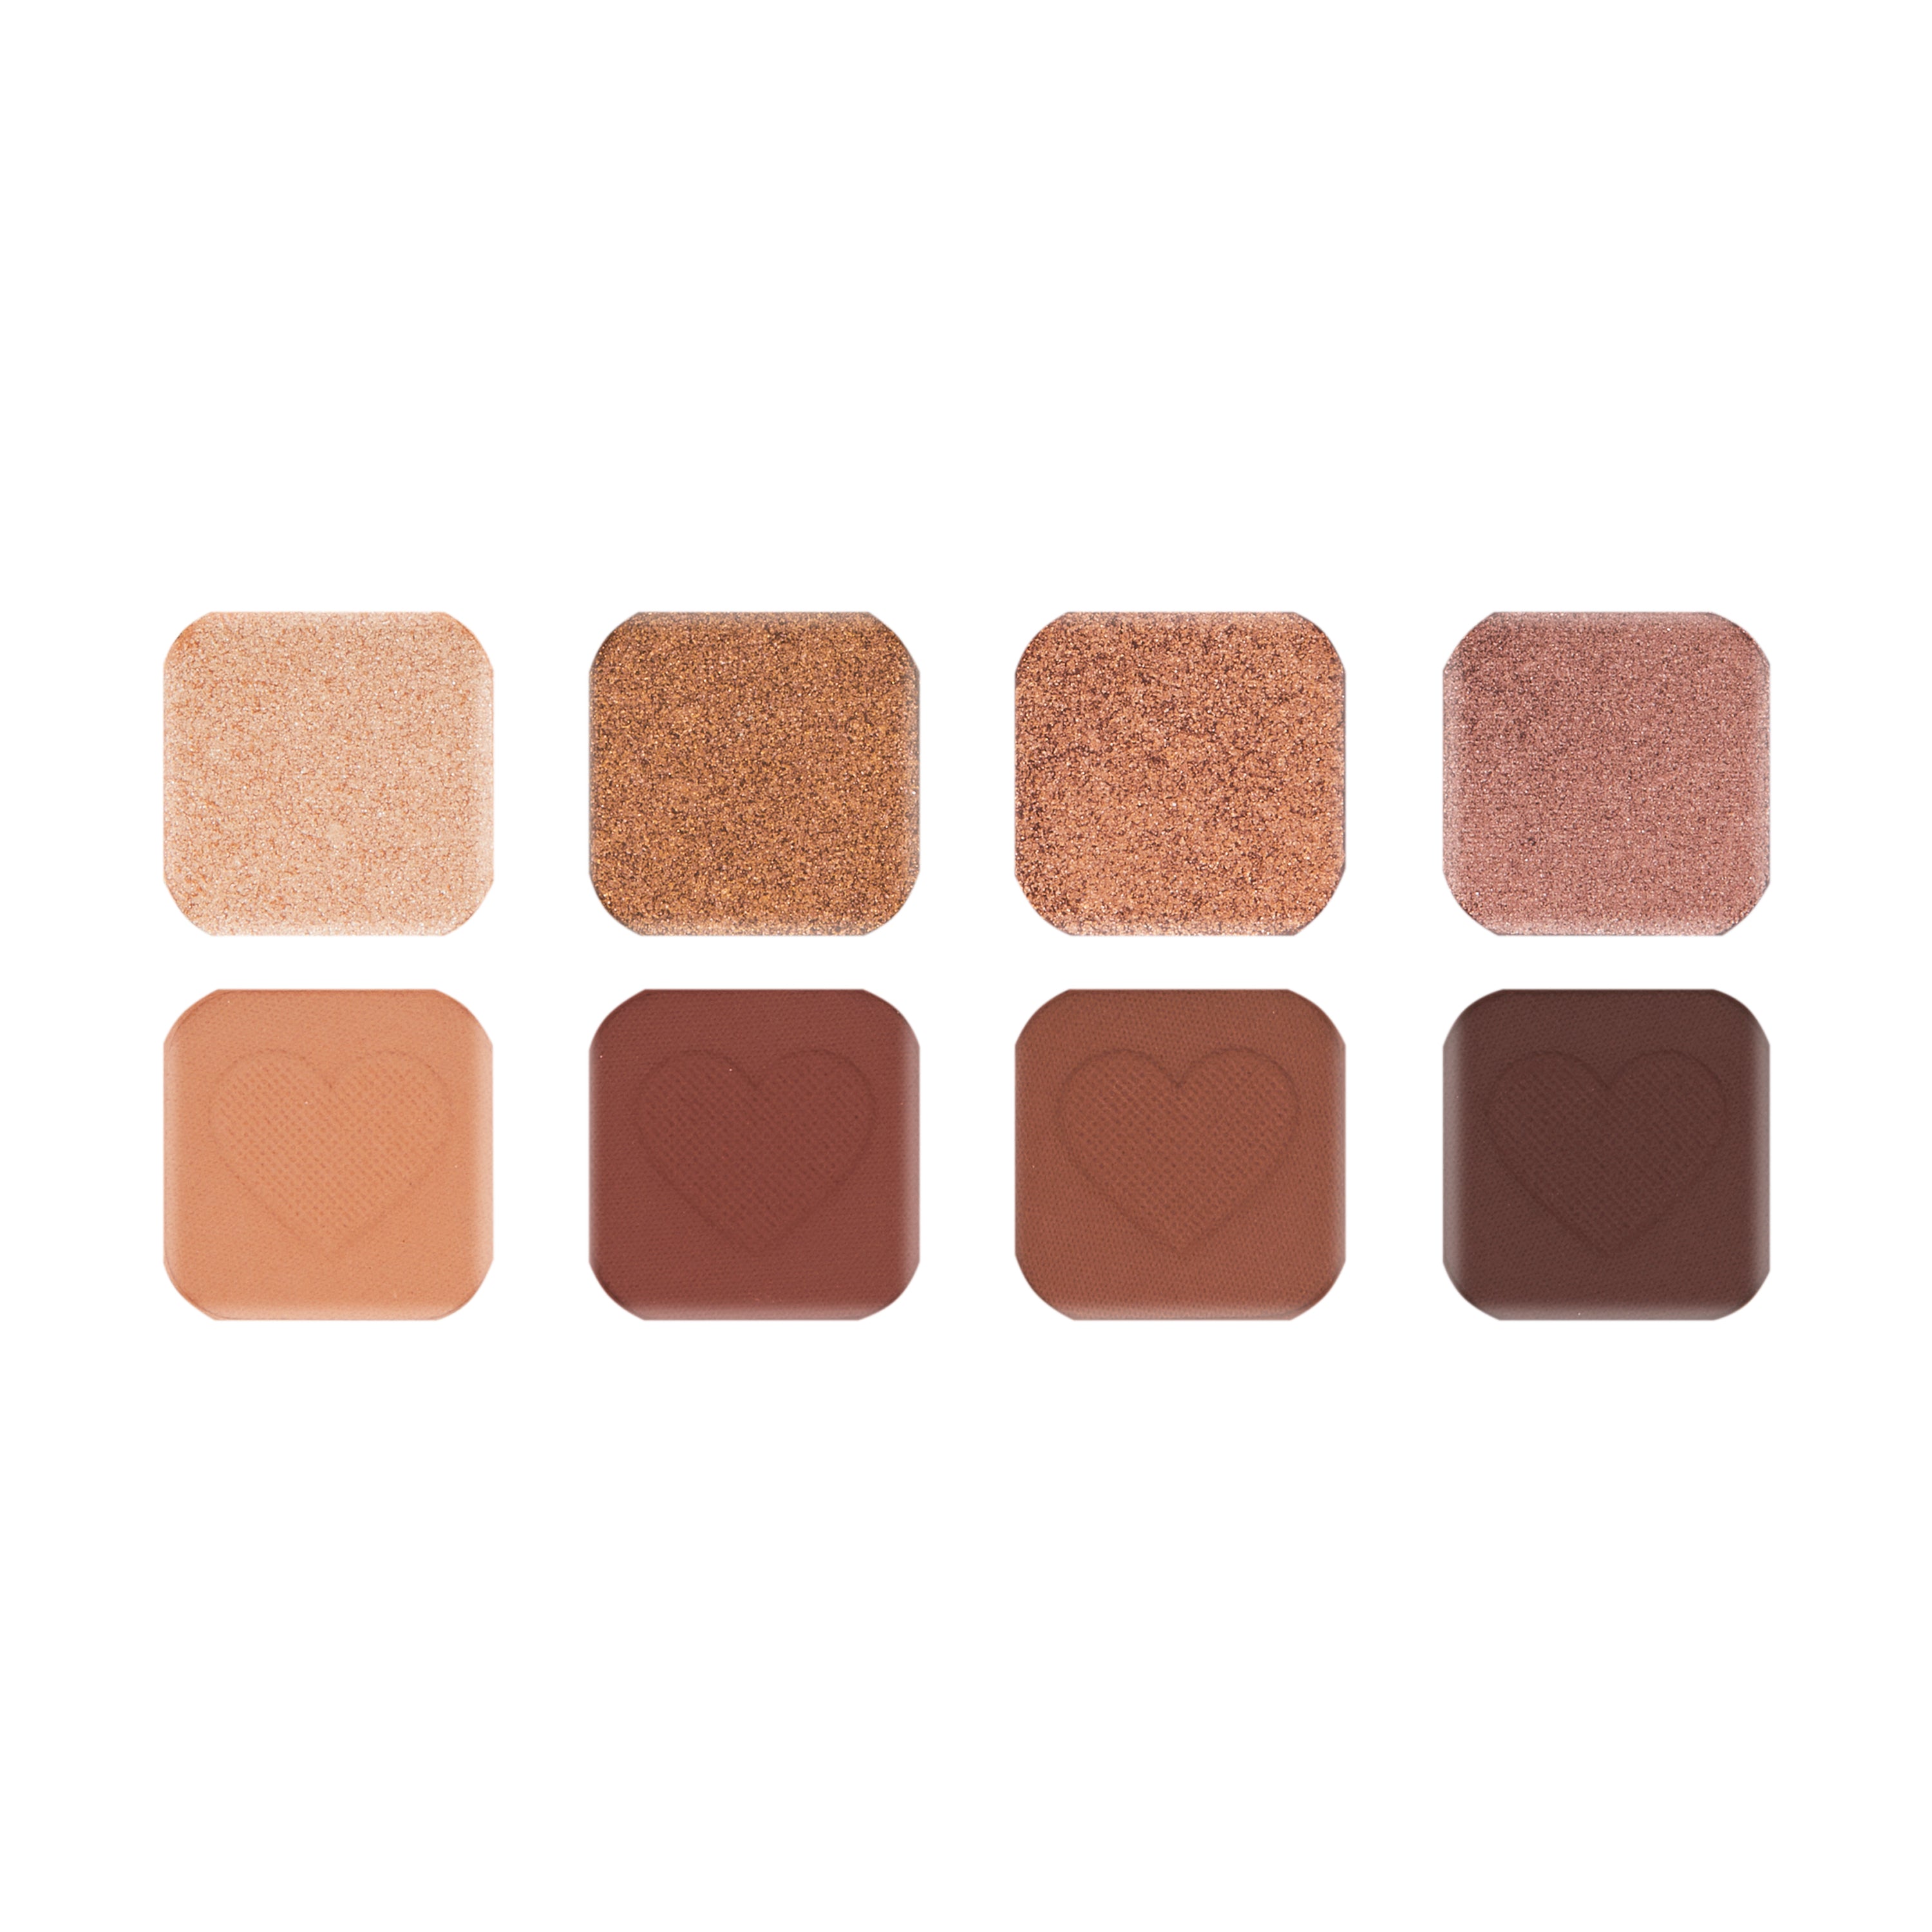 Makeup Revolution x Love Island Go for a Chat Dynamic Palette